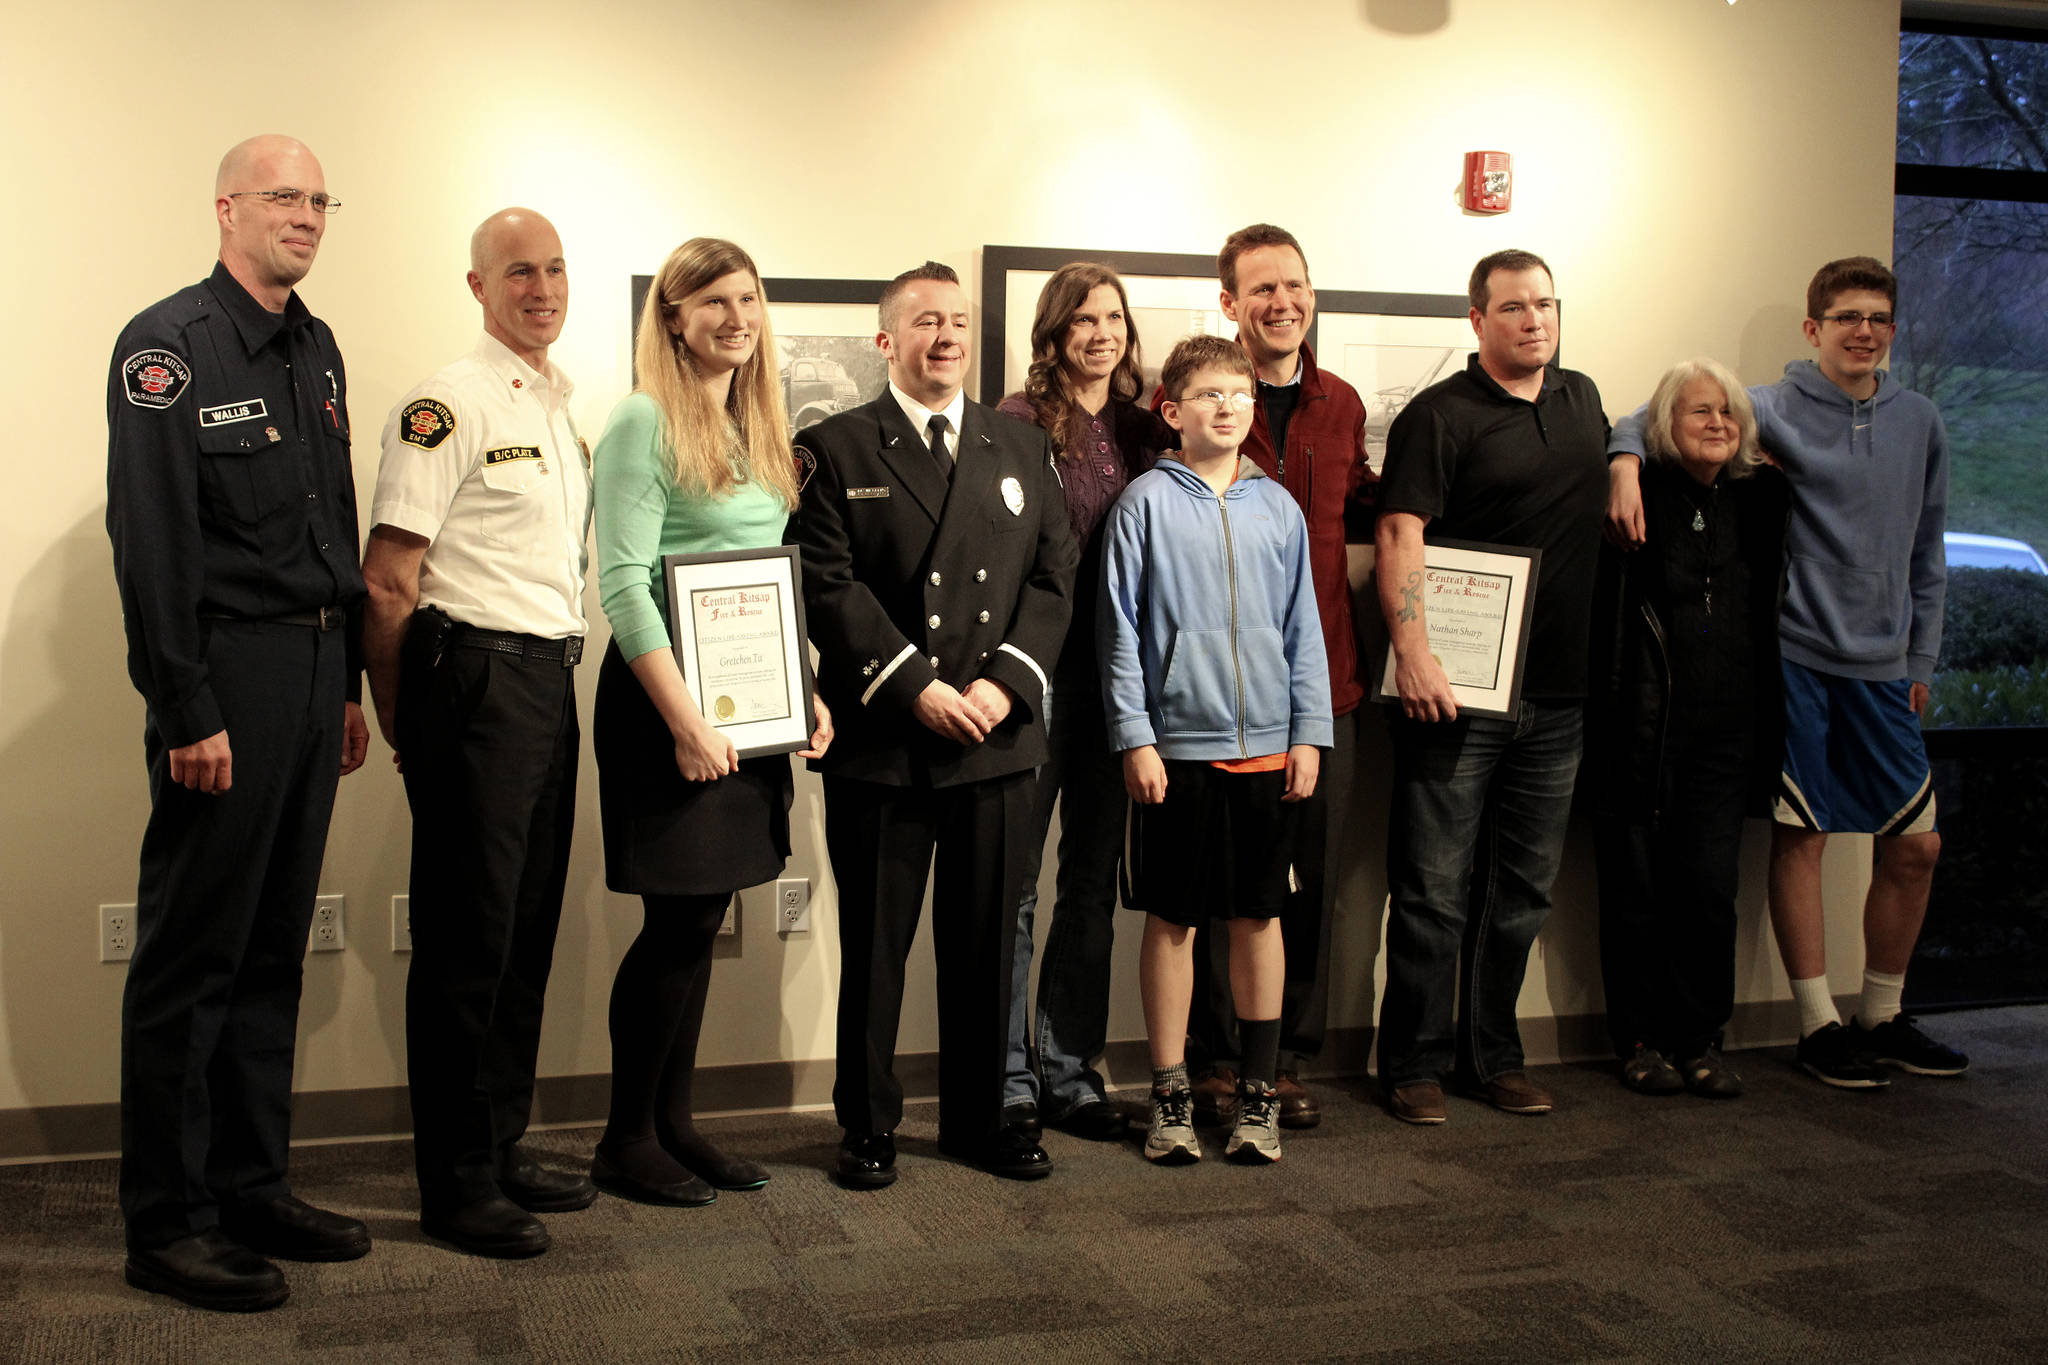 Central Kitsap Fire and Rescue awarded Gretchen Ta and Nathan Sharp Citizen Life-Saving Awards Jan. 8 for their efforts Nov. 23 to help Tom Wilkinson in the Turkey Trot.                                Michelle Beahm / Kitsap News Group